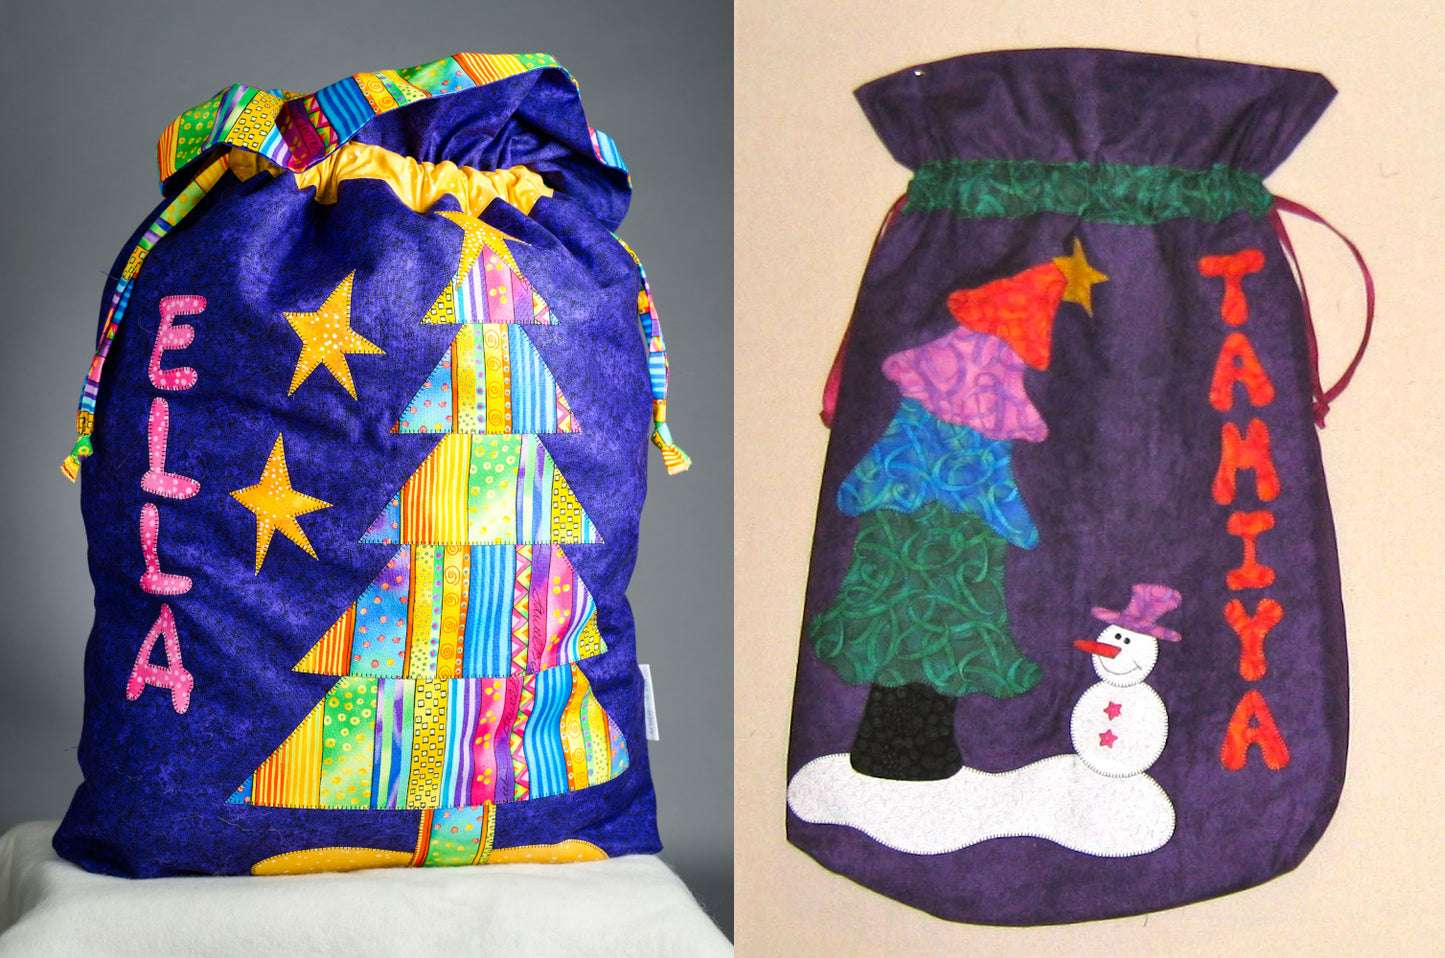 personalized santa sack patterns with trees and snowman applique